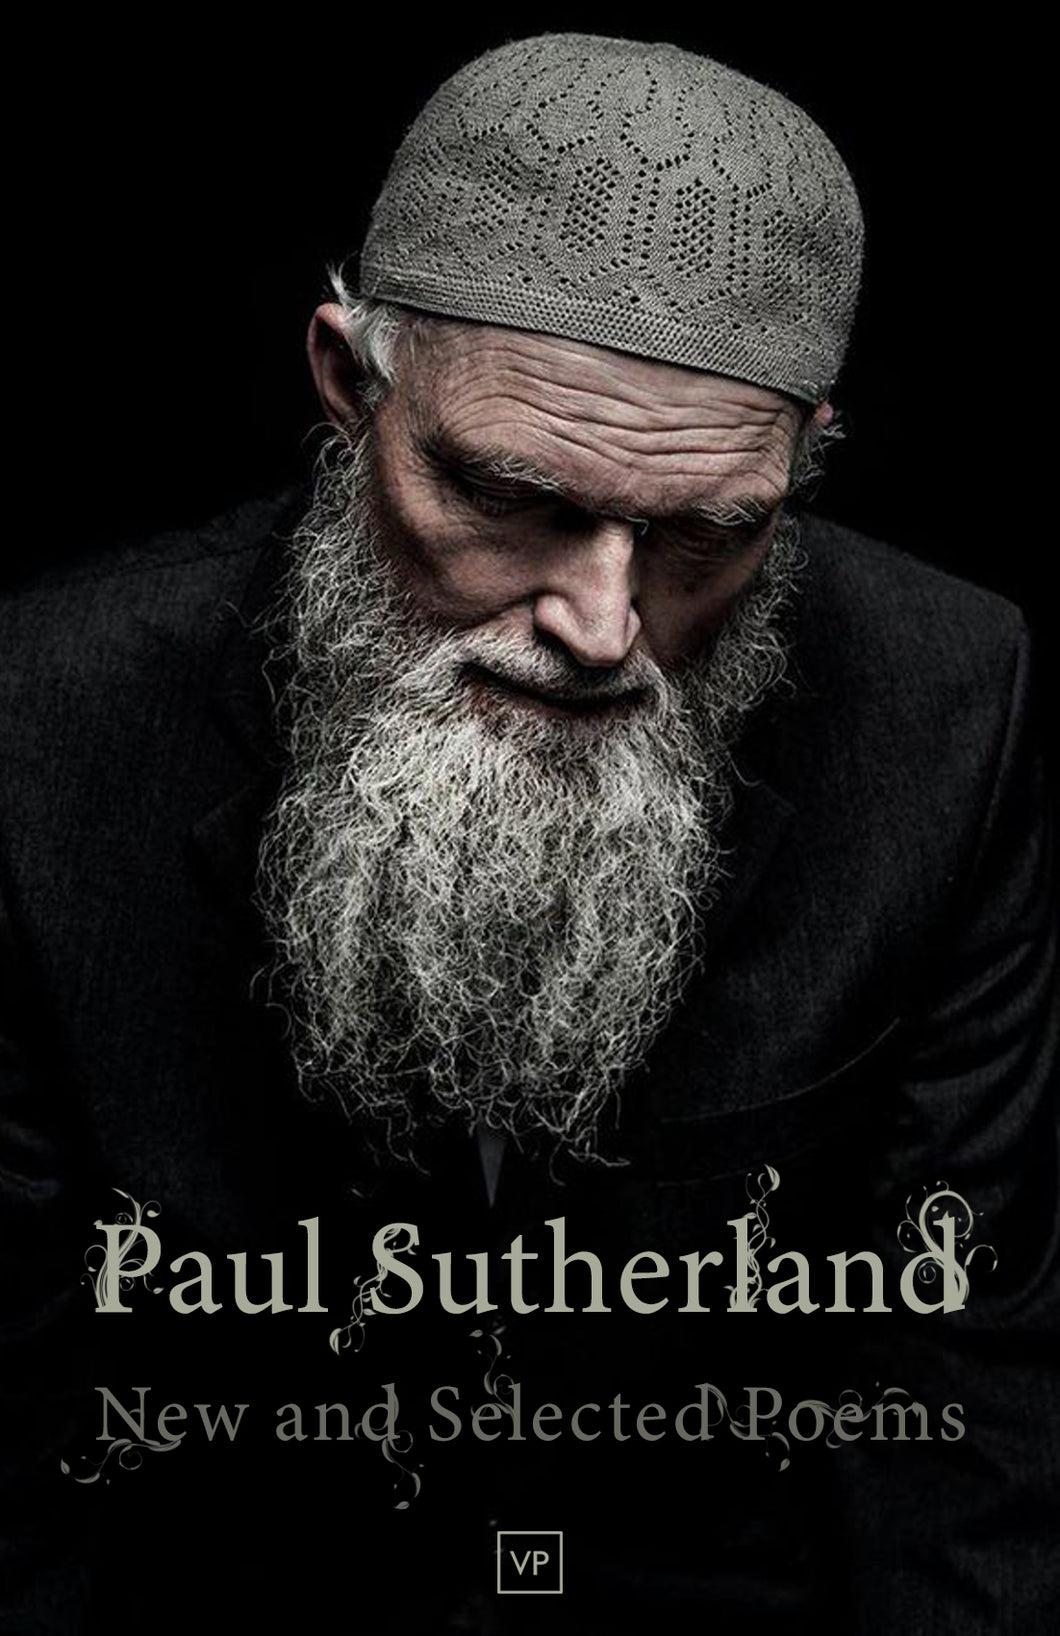 Paul Sutherland: New and Selected Poems